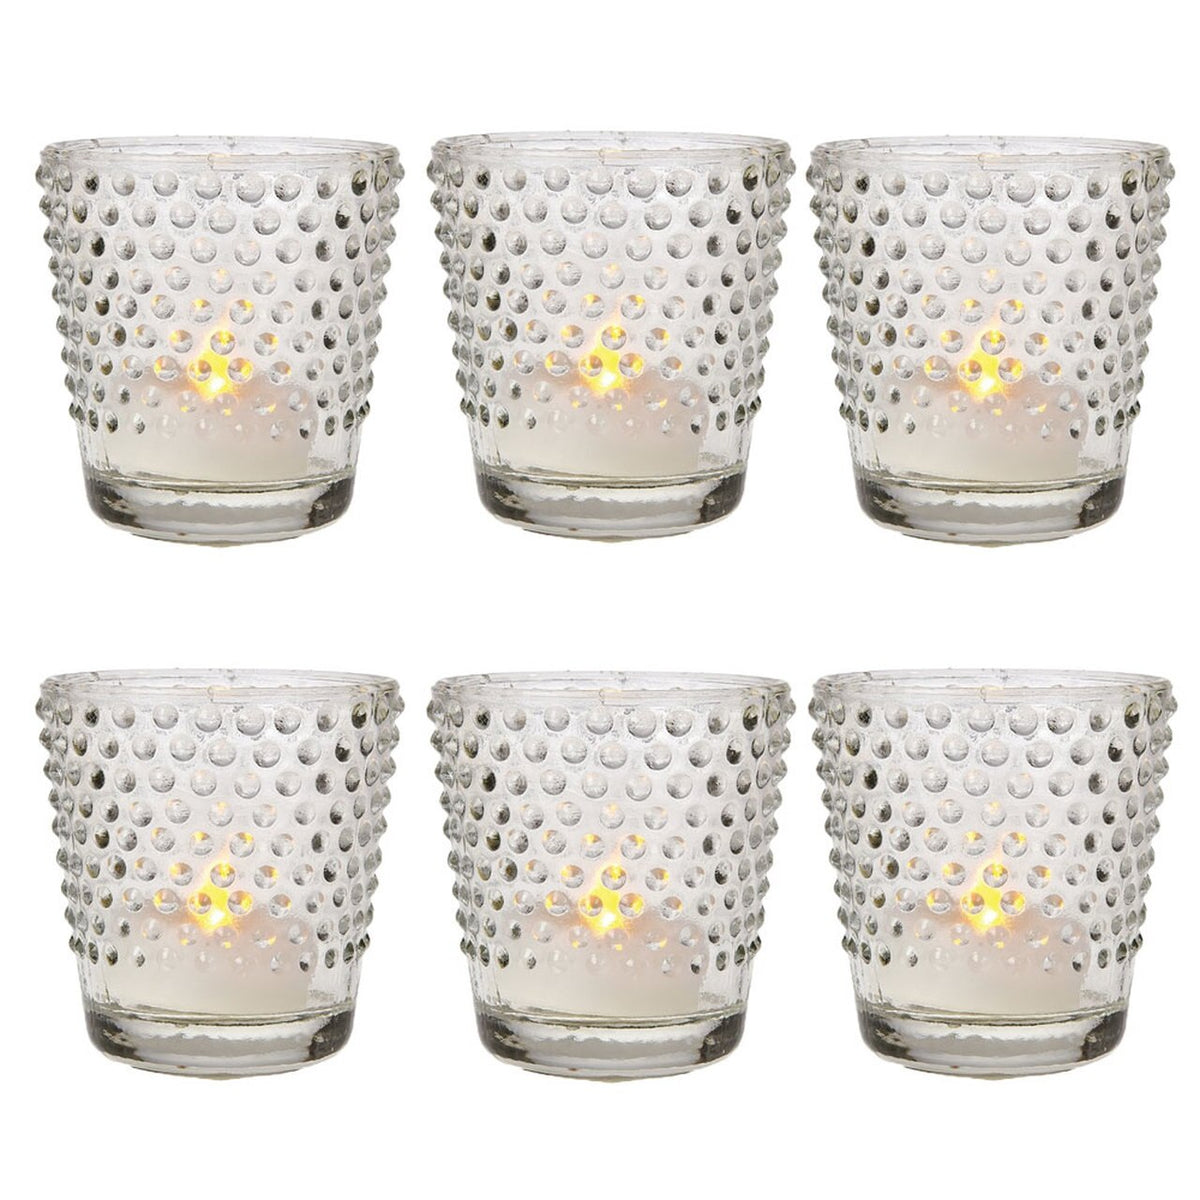 6 Pack | Hobnail Glass Candle Holder (2.5-Inch, Candace Design, Clear) - Use with Tea Lights - For Home Decor, Parties, and Wedding Decorations - PaperLanternStore.com - Paper Lanterns, Decor, Party Lights &amp; More